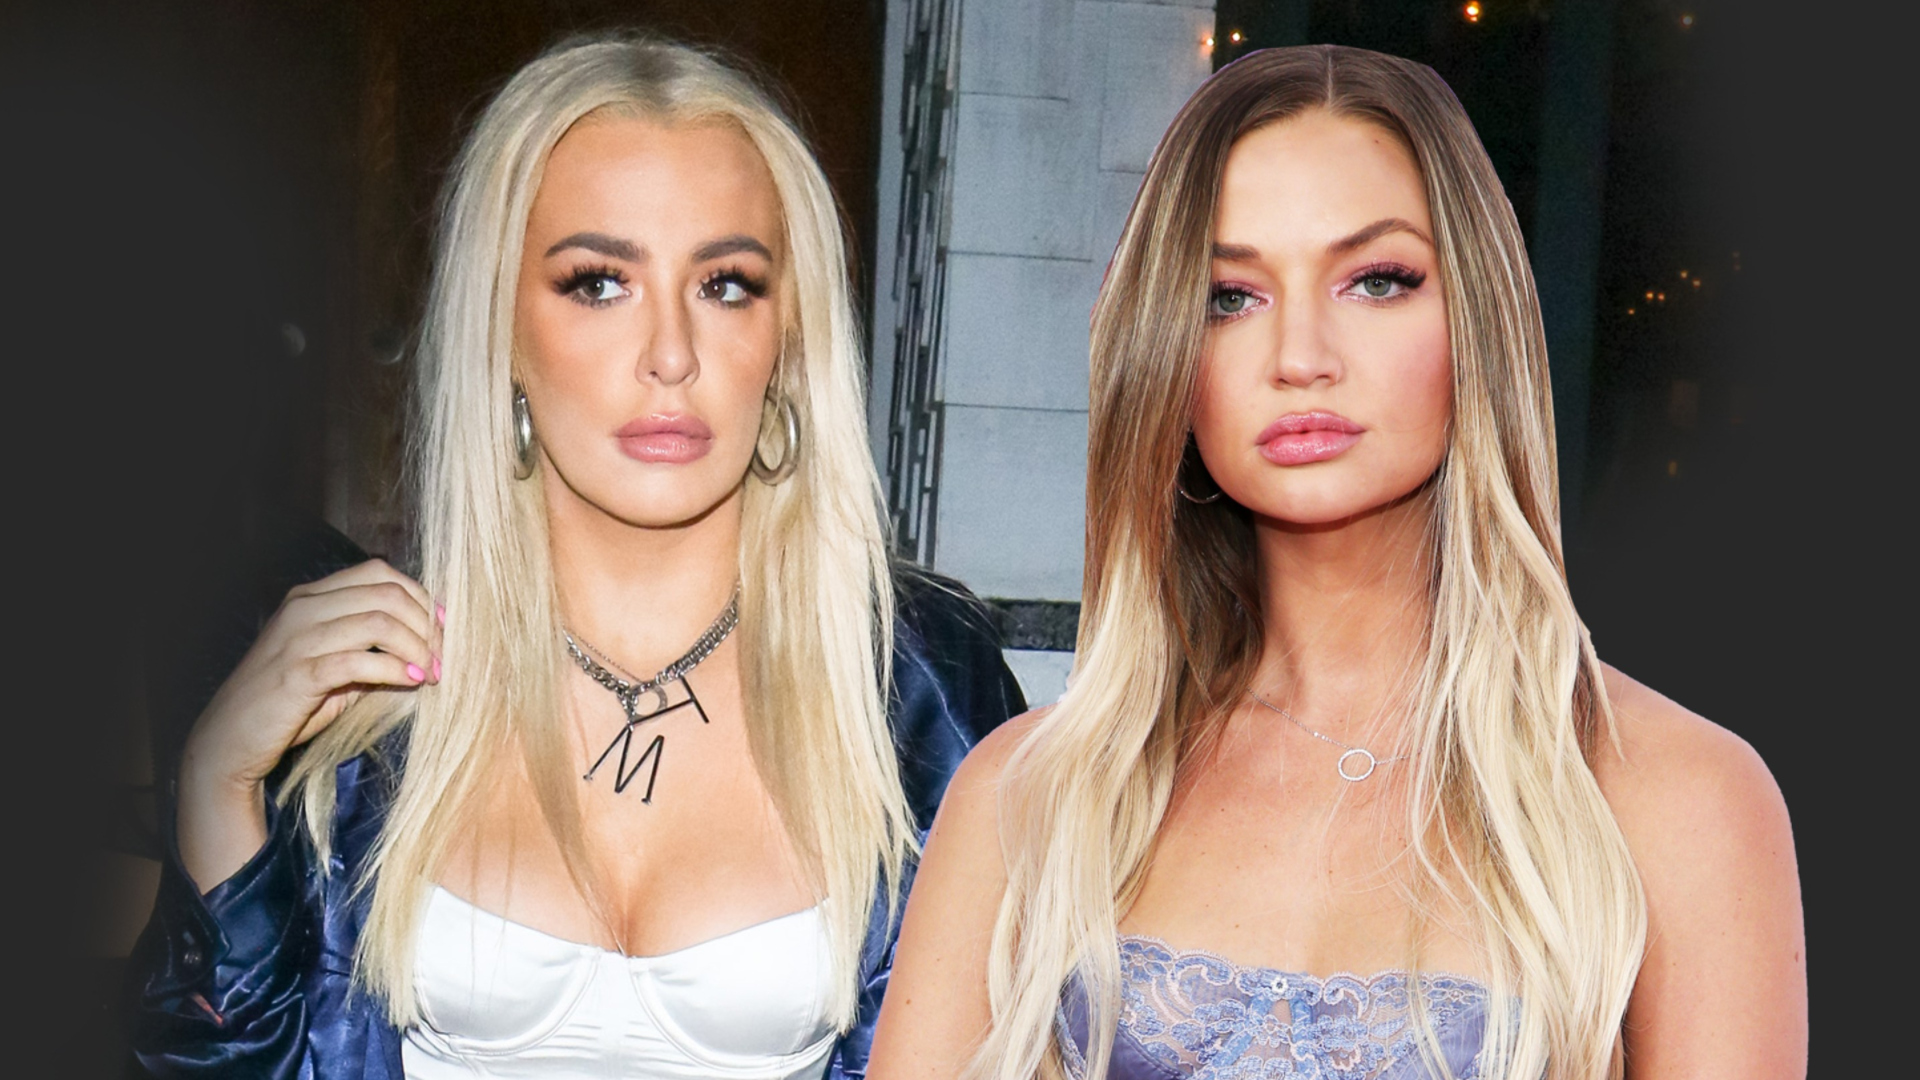 Tana Mongeau & Erika Costell Apologize for Partying Amid Pandemic.